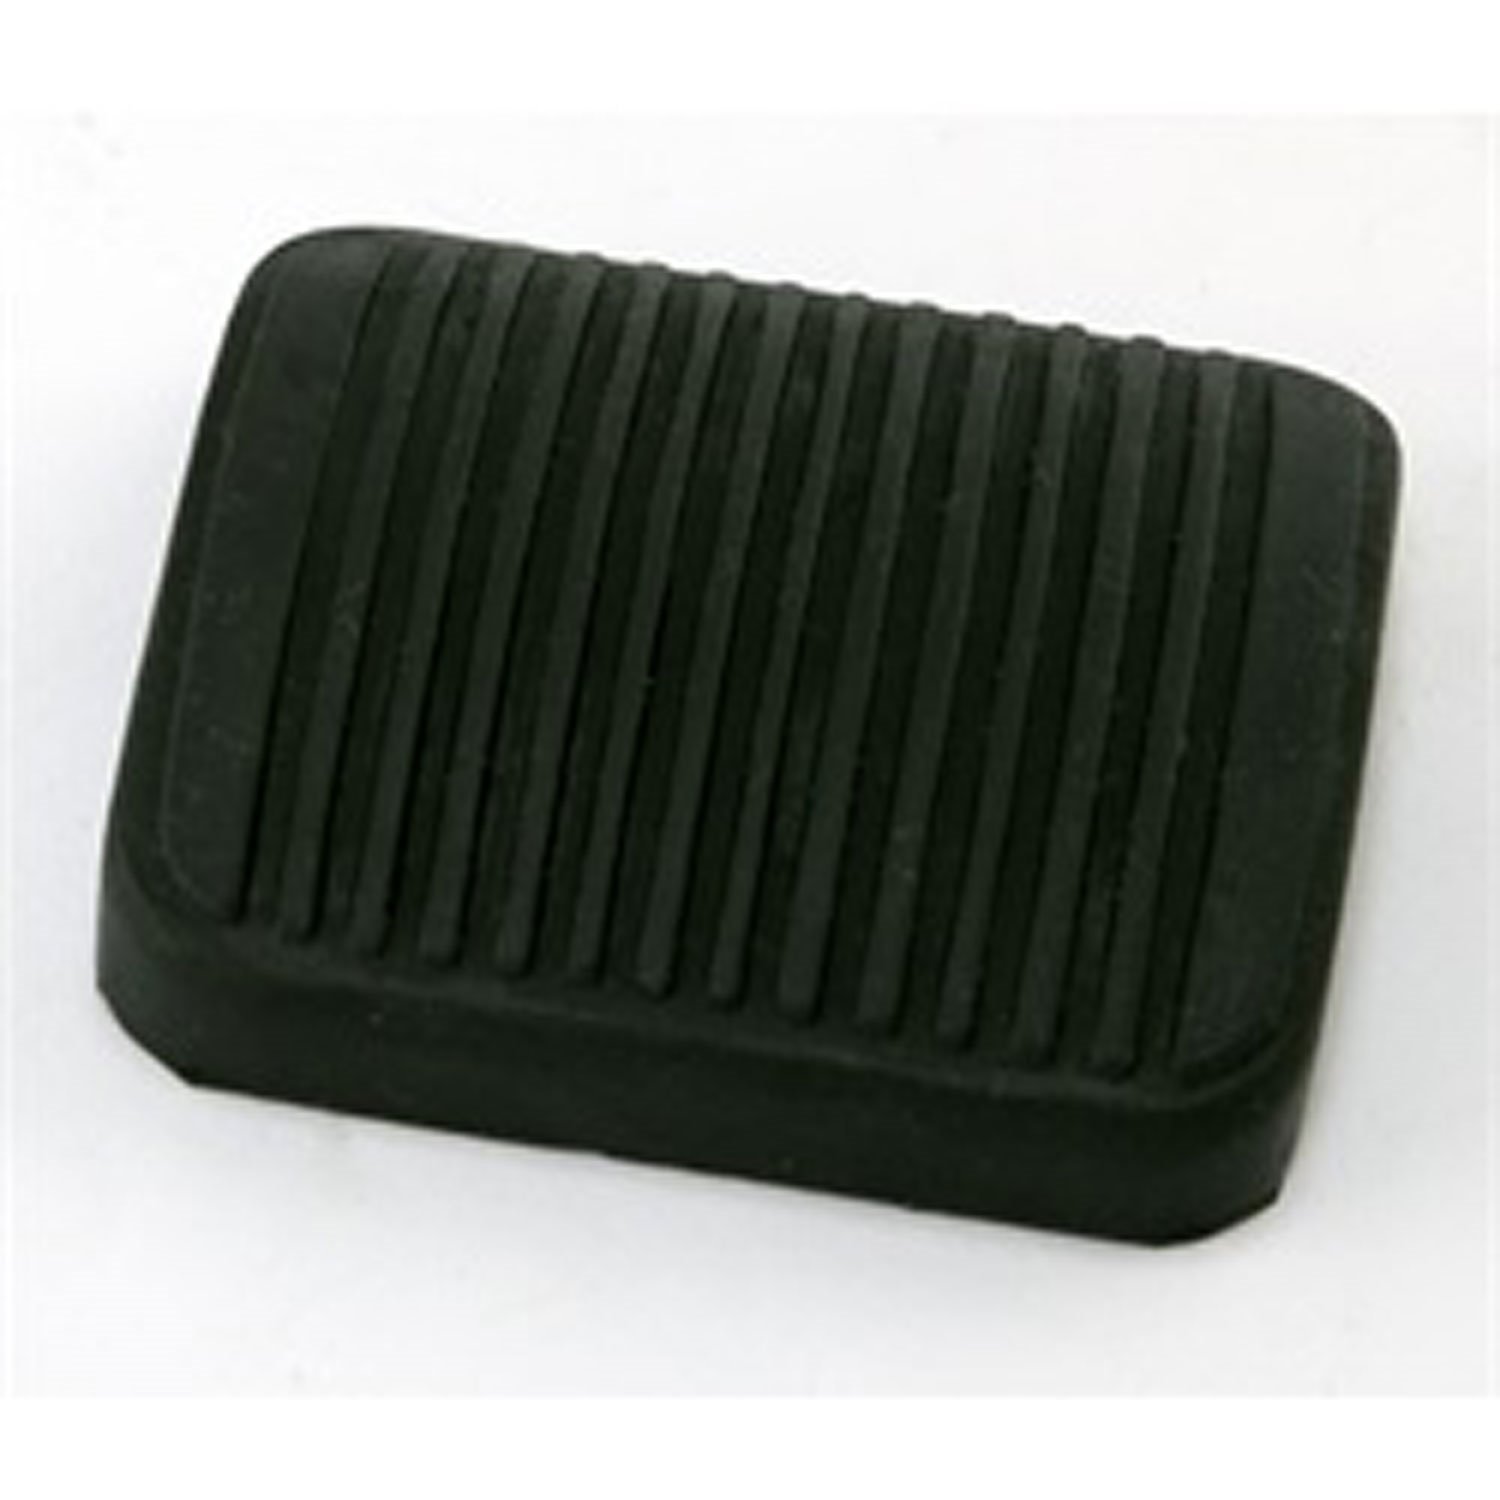 Pedal Pad, Brake or Clutch for Select 1984-2016 Jeep Models